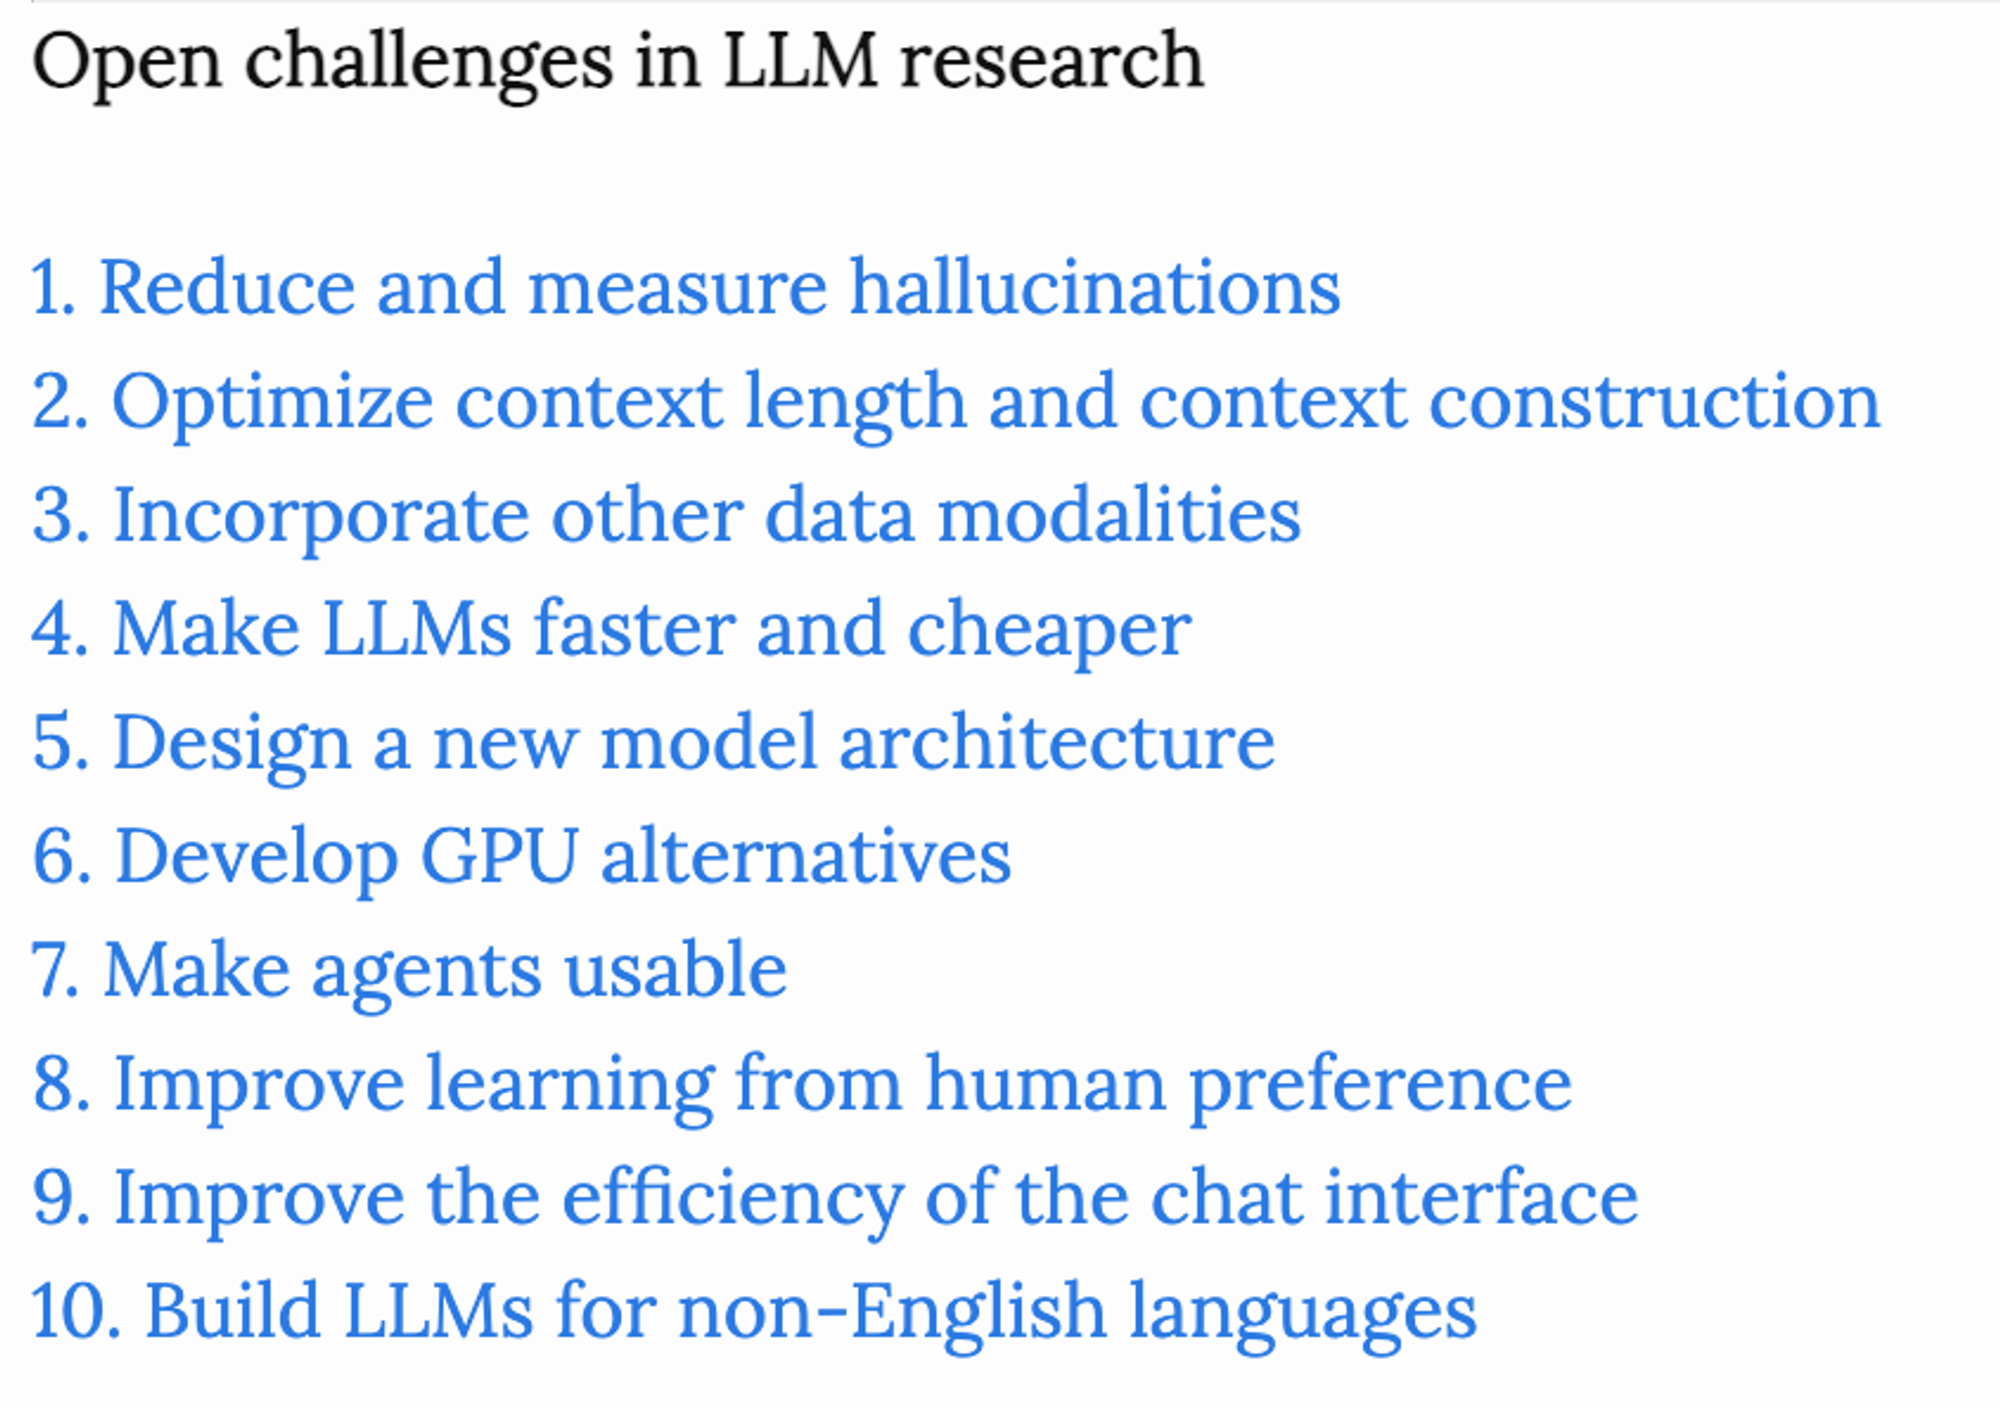 Open challenges in LLM research